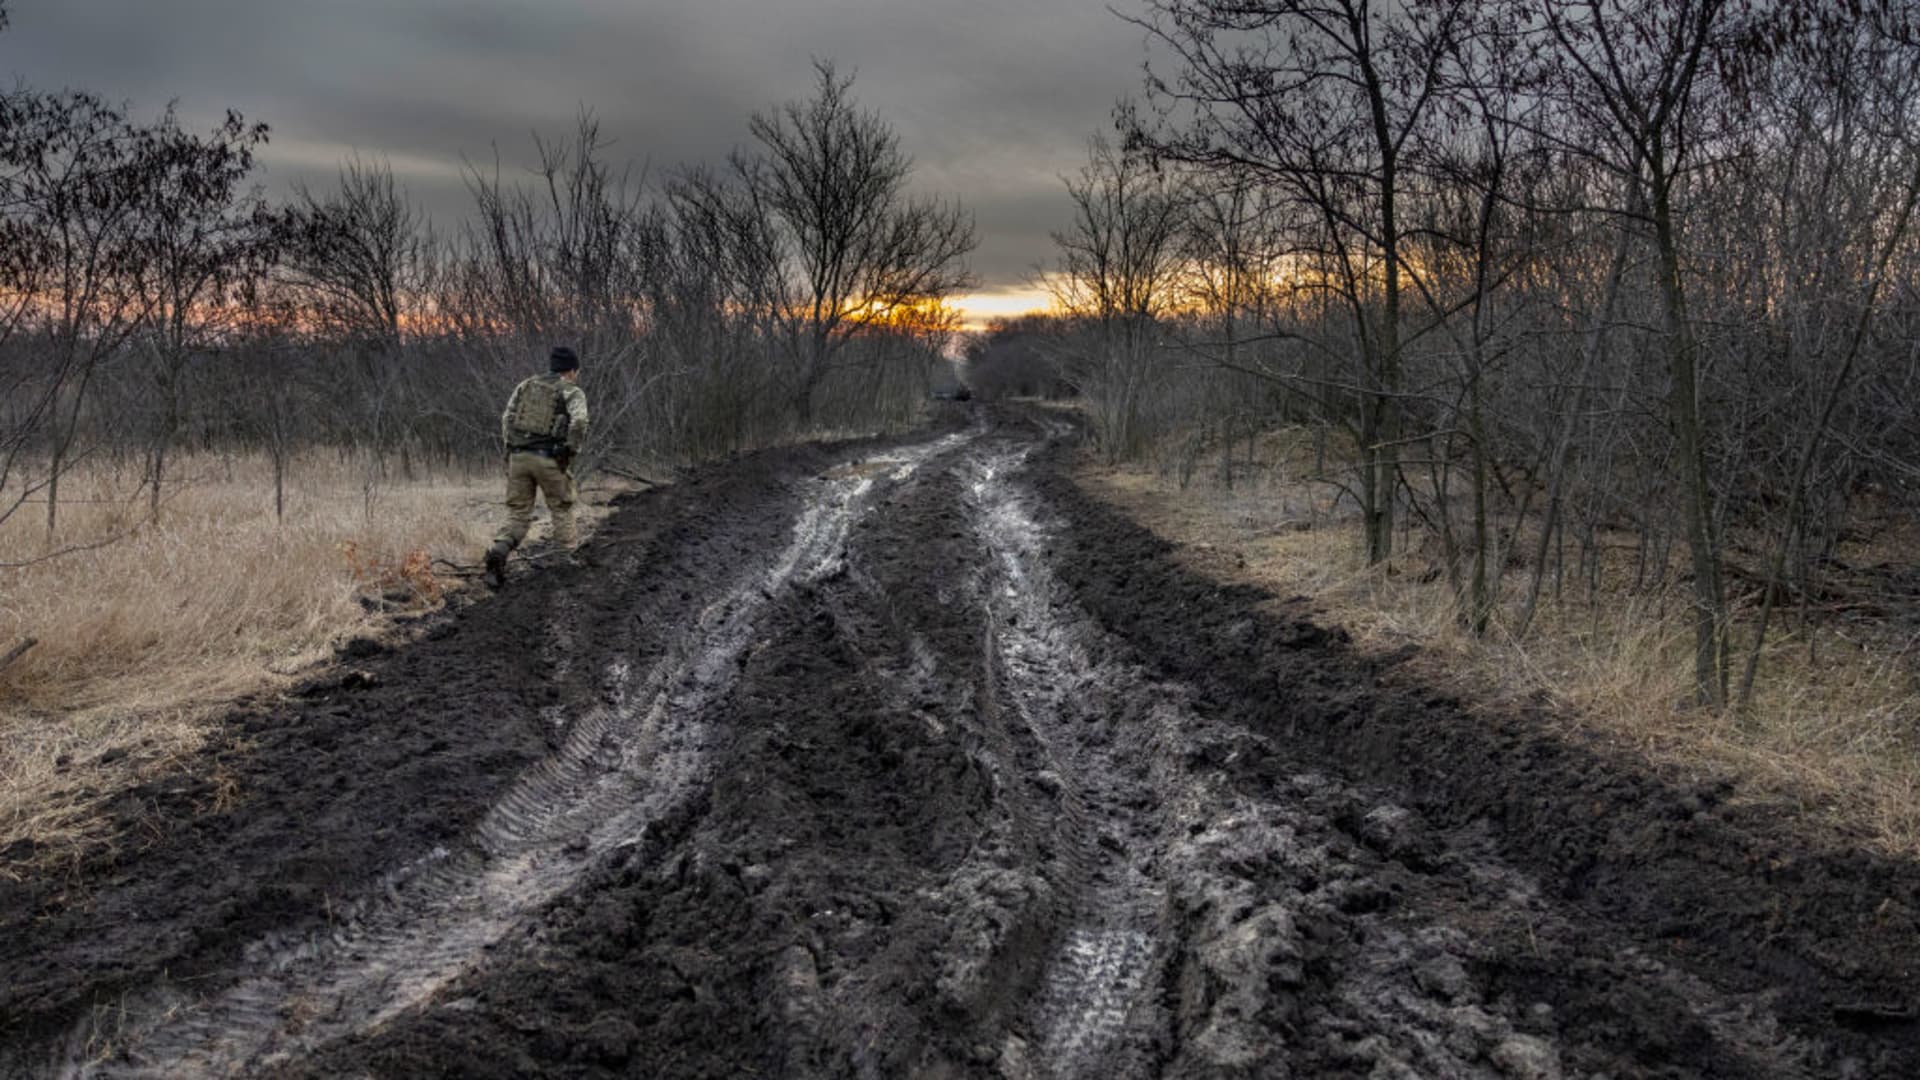 A soldier from a Ukrainian assault brigade walks along a muddy road used to transport and position British-made L118 105mm Howitzers, on March 4, 2023, near Bakhmut, Ukraine.